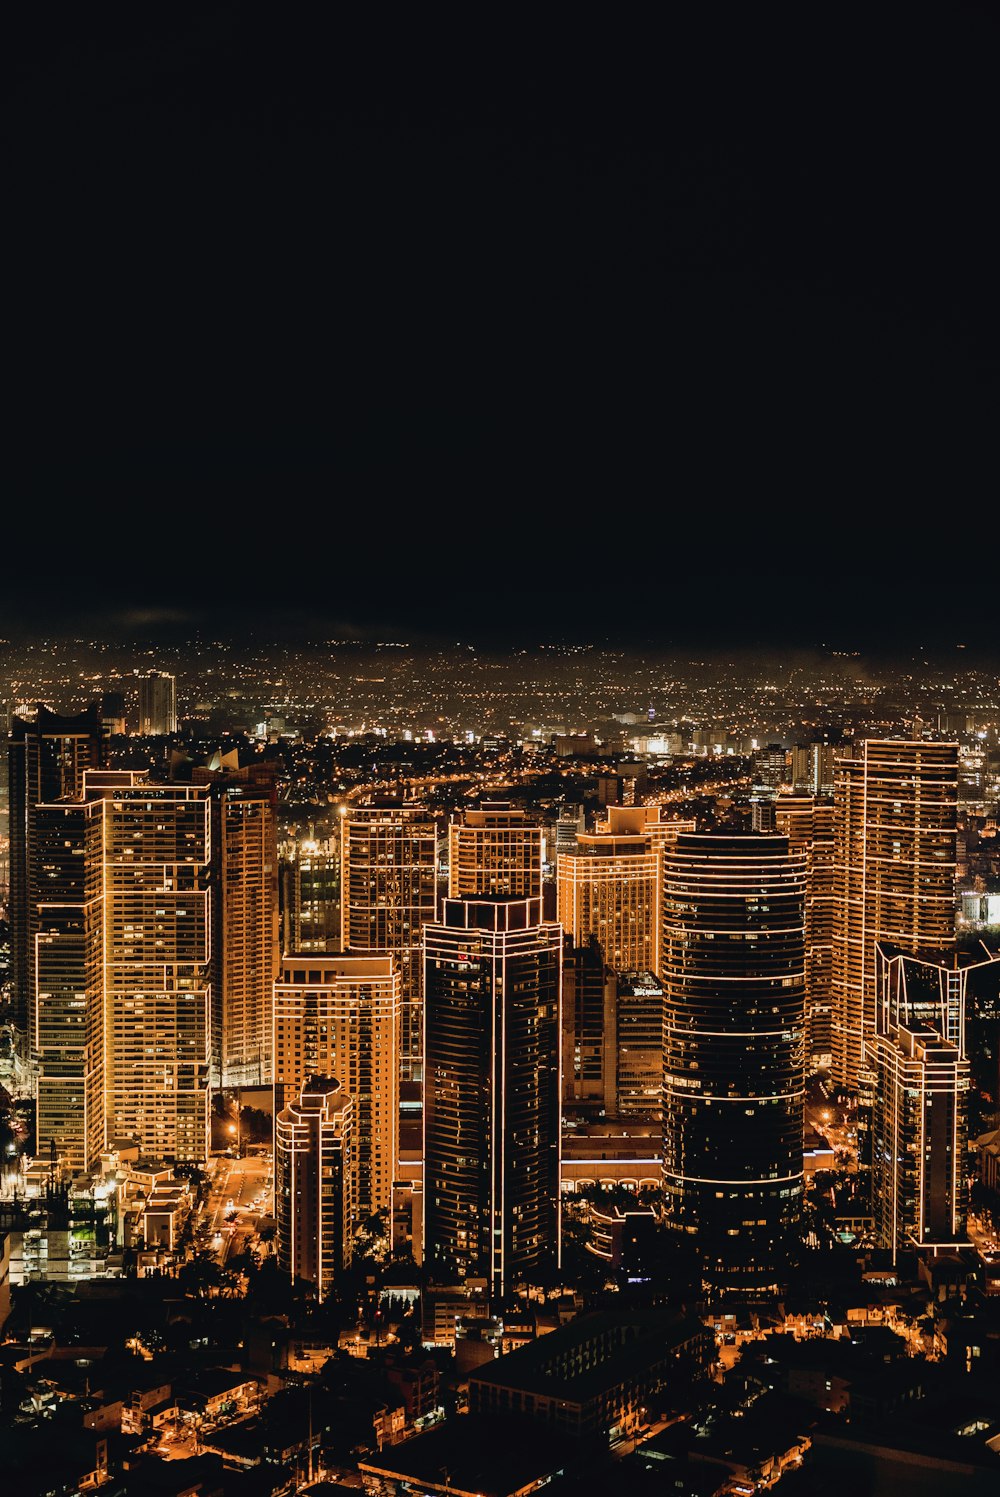 750+ Smart City Pictures [HD] | Download Free Images on Unsplash